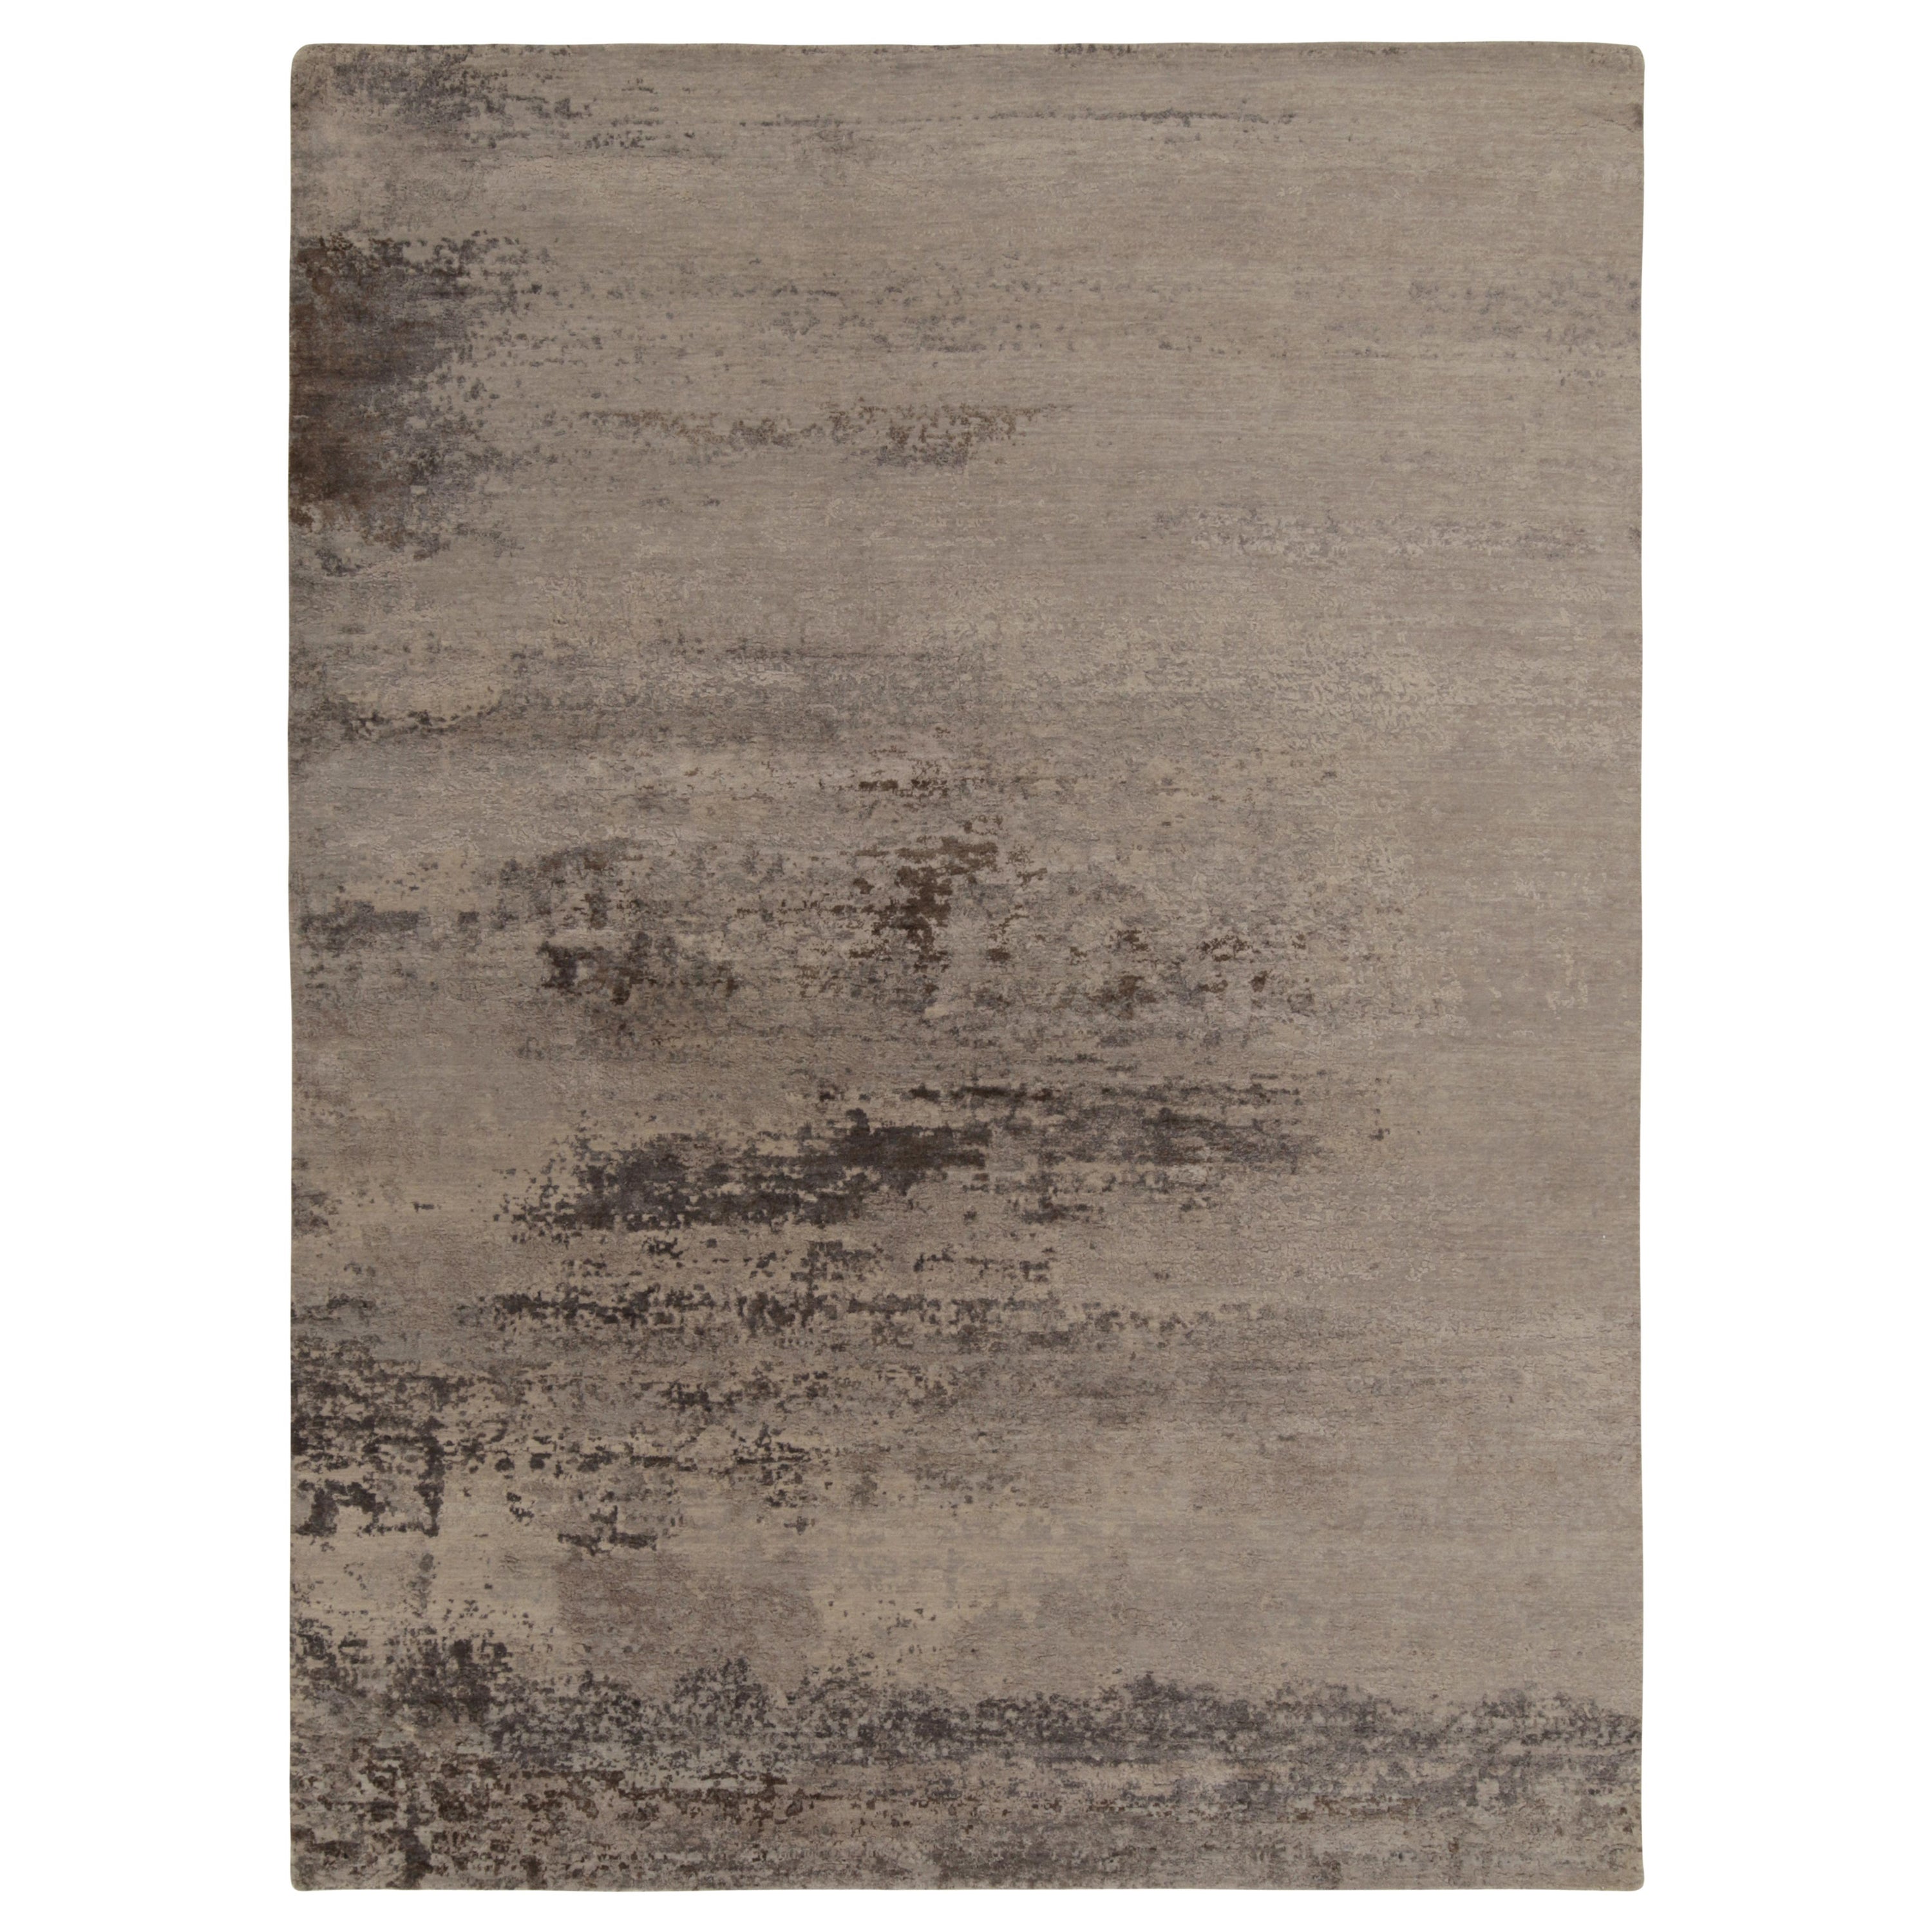 Rug & Kilim’s Abstract Rug in Silver-Grey, Beige-Brown Textural Pattern